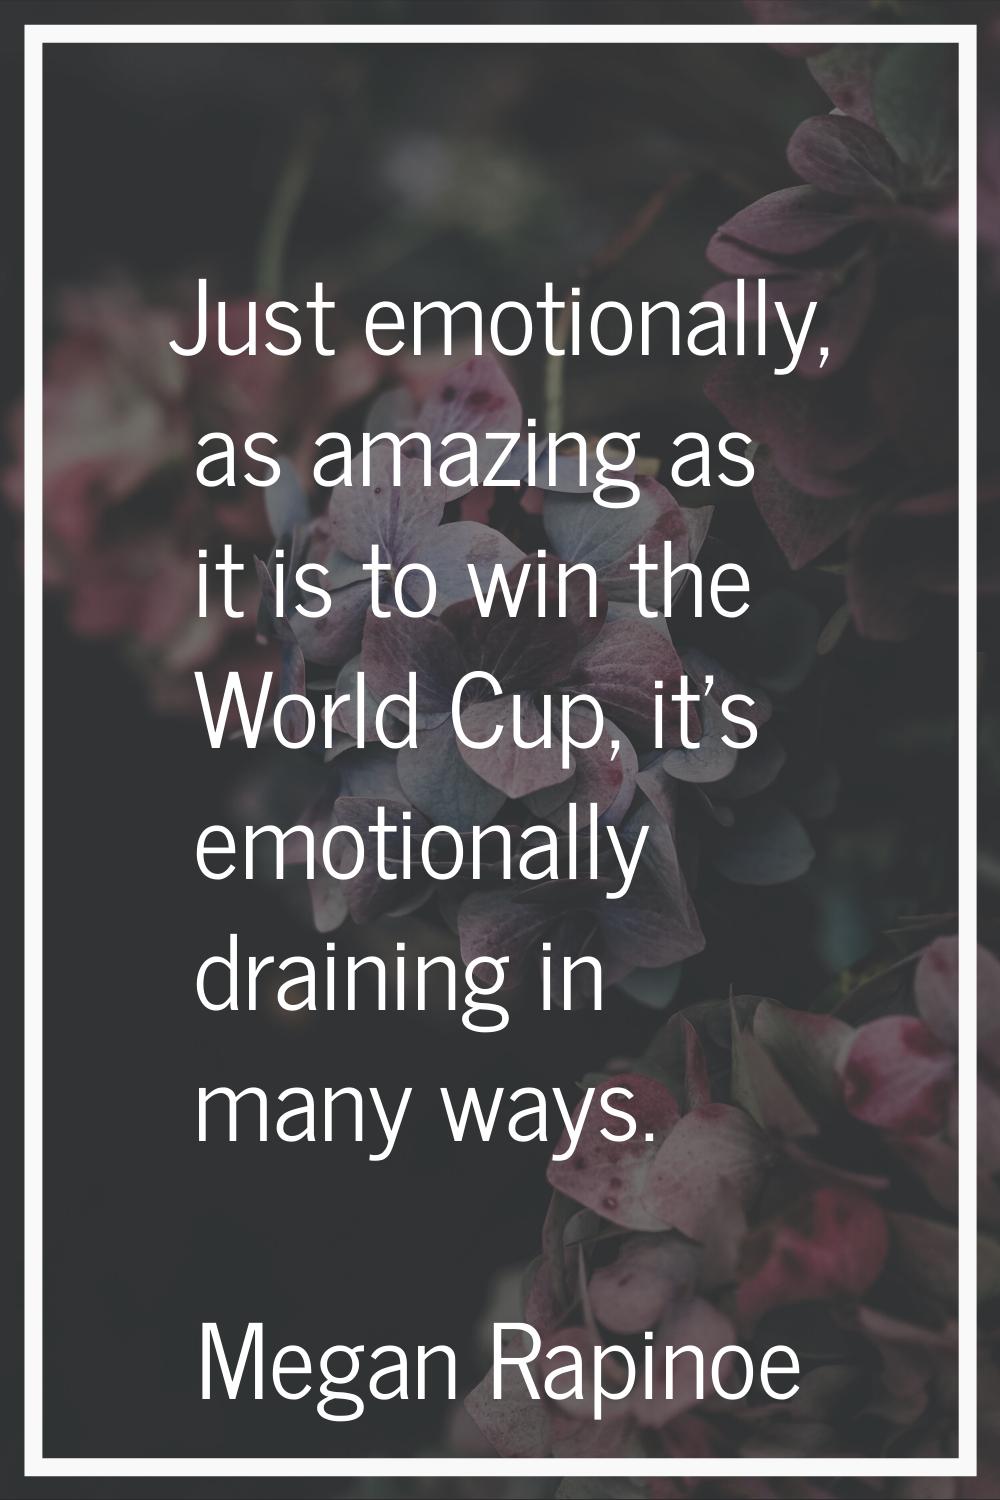 Just emotionally, as amazing as it is to win the World Cup, it's emotionally draining in many ways.